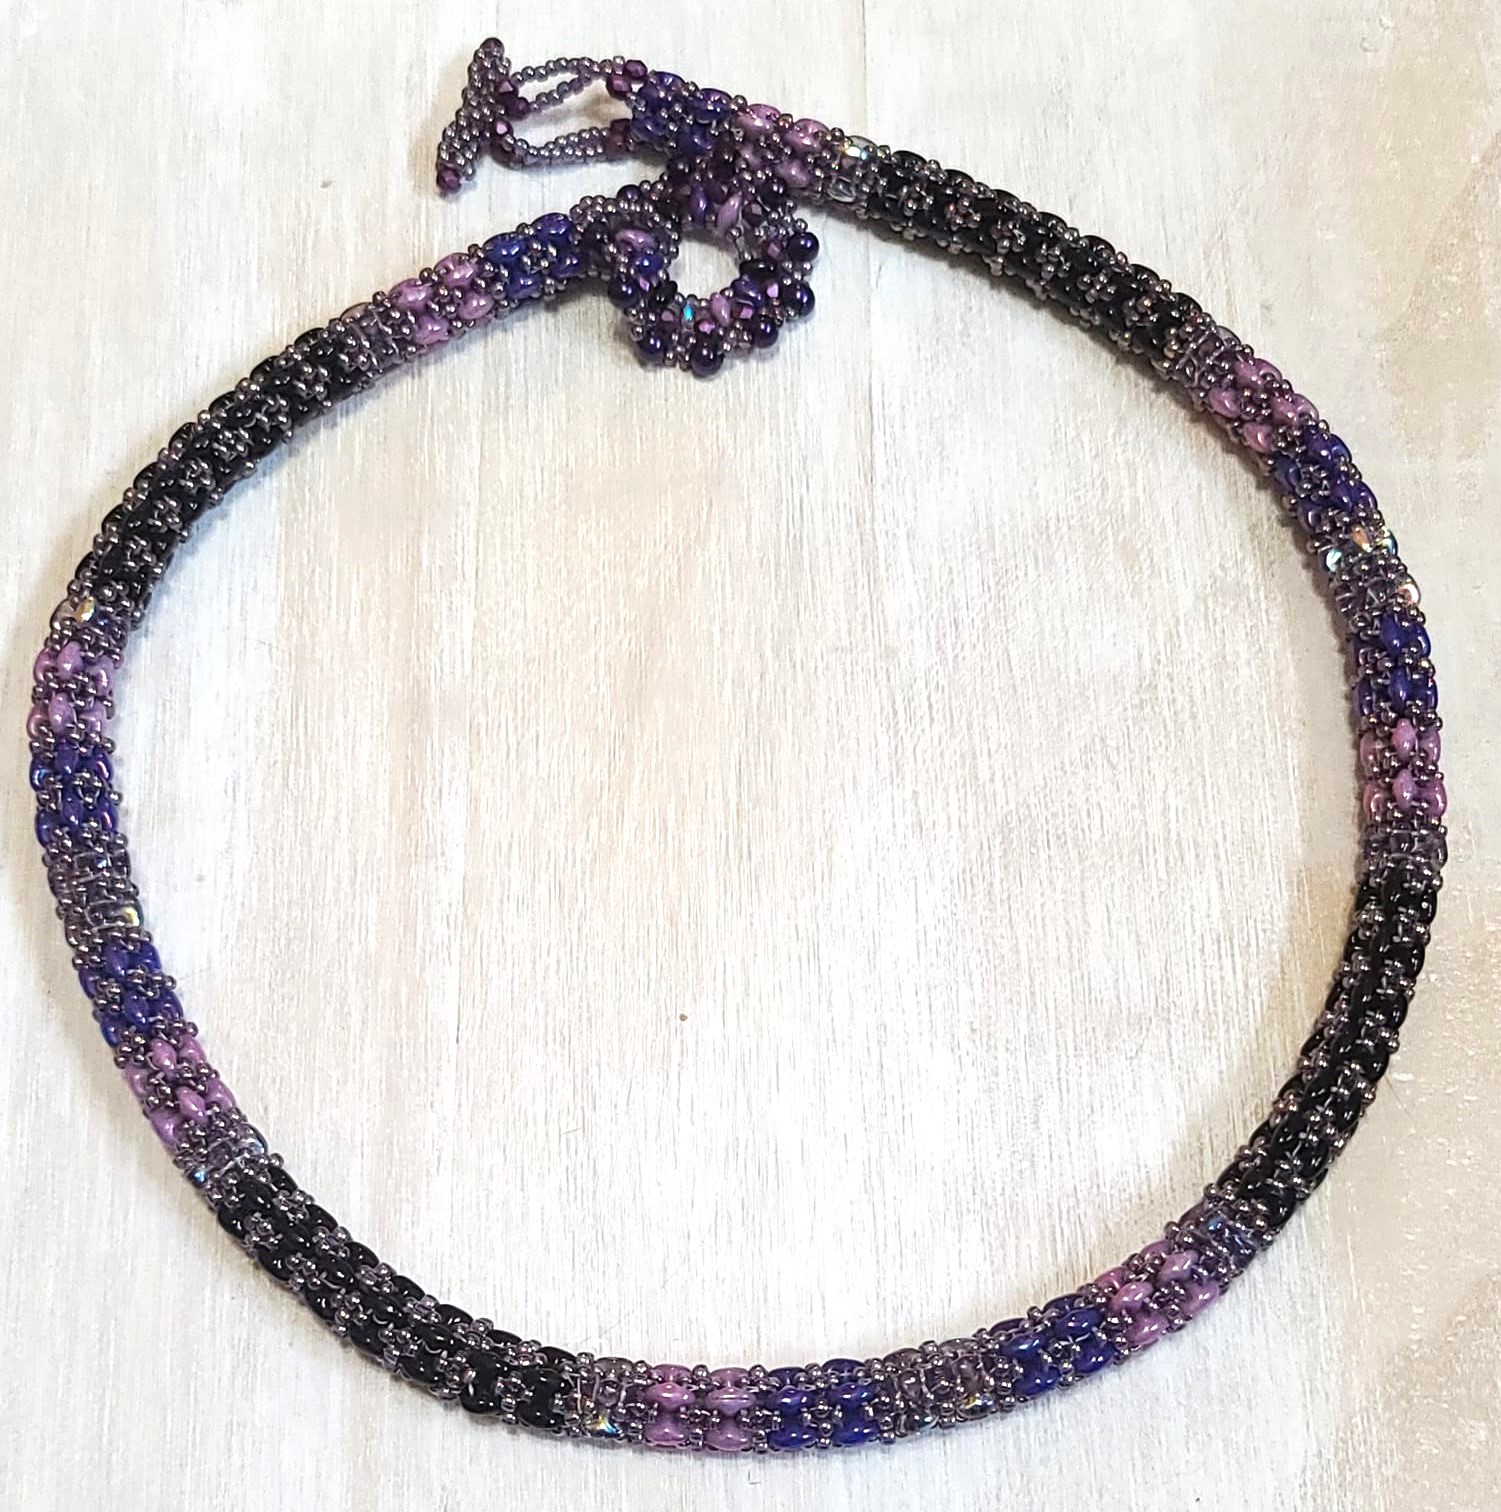 Beaded rope necklace, handcrafted, glass super duos and crystals